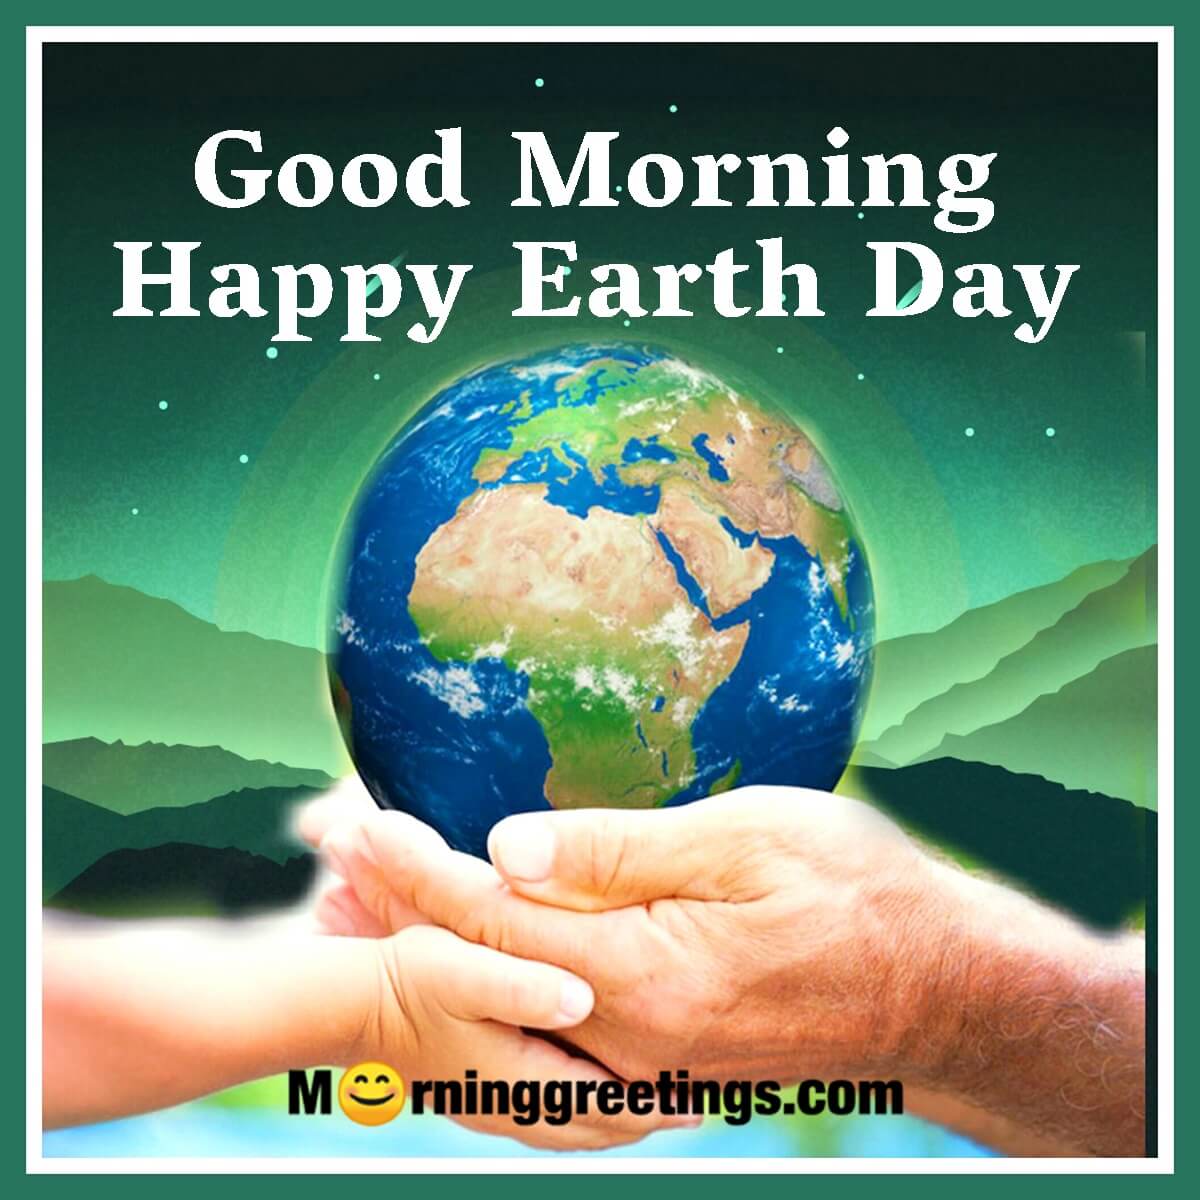 Good Morning Happy Earth Day Image